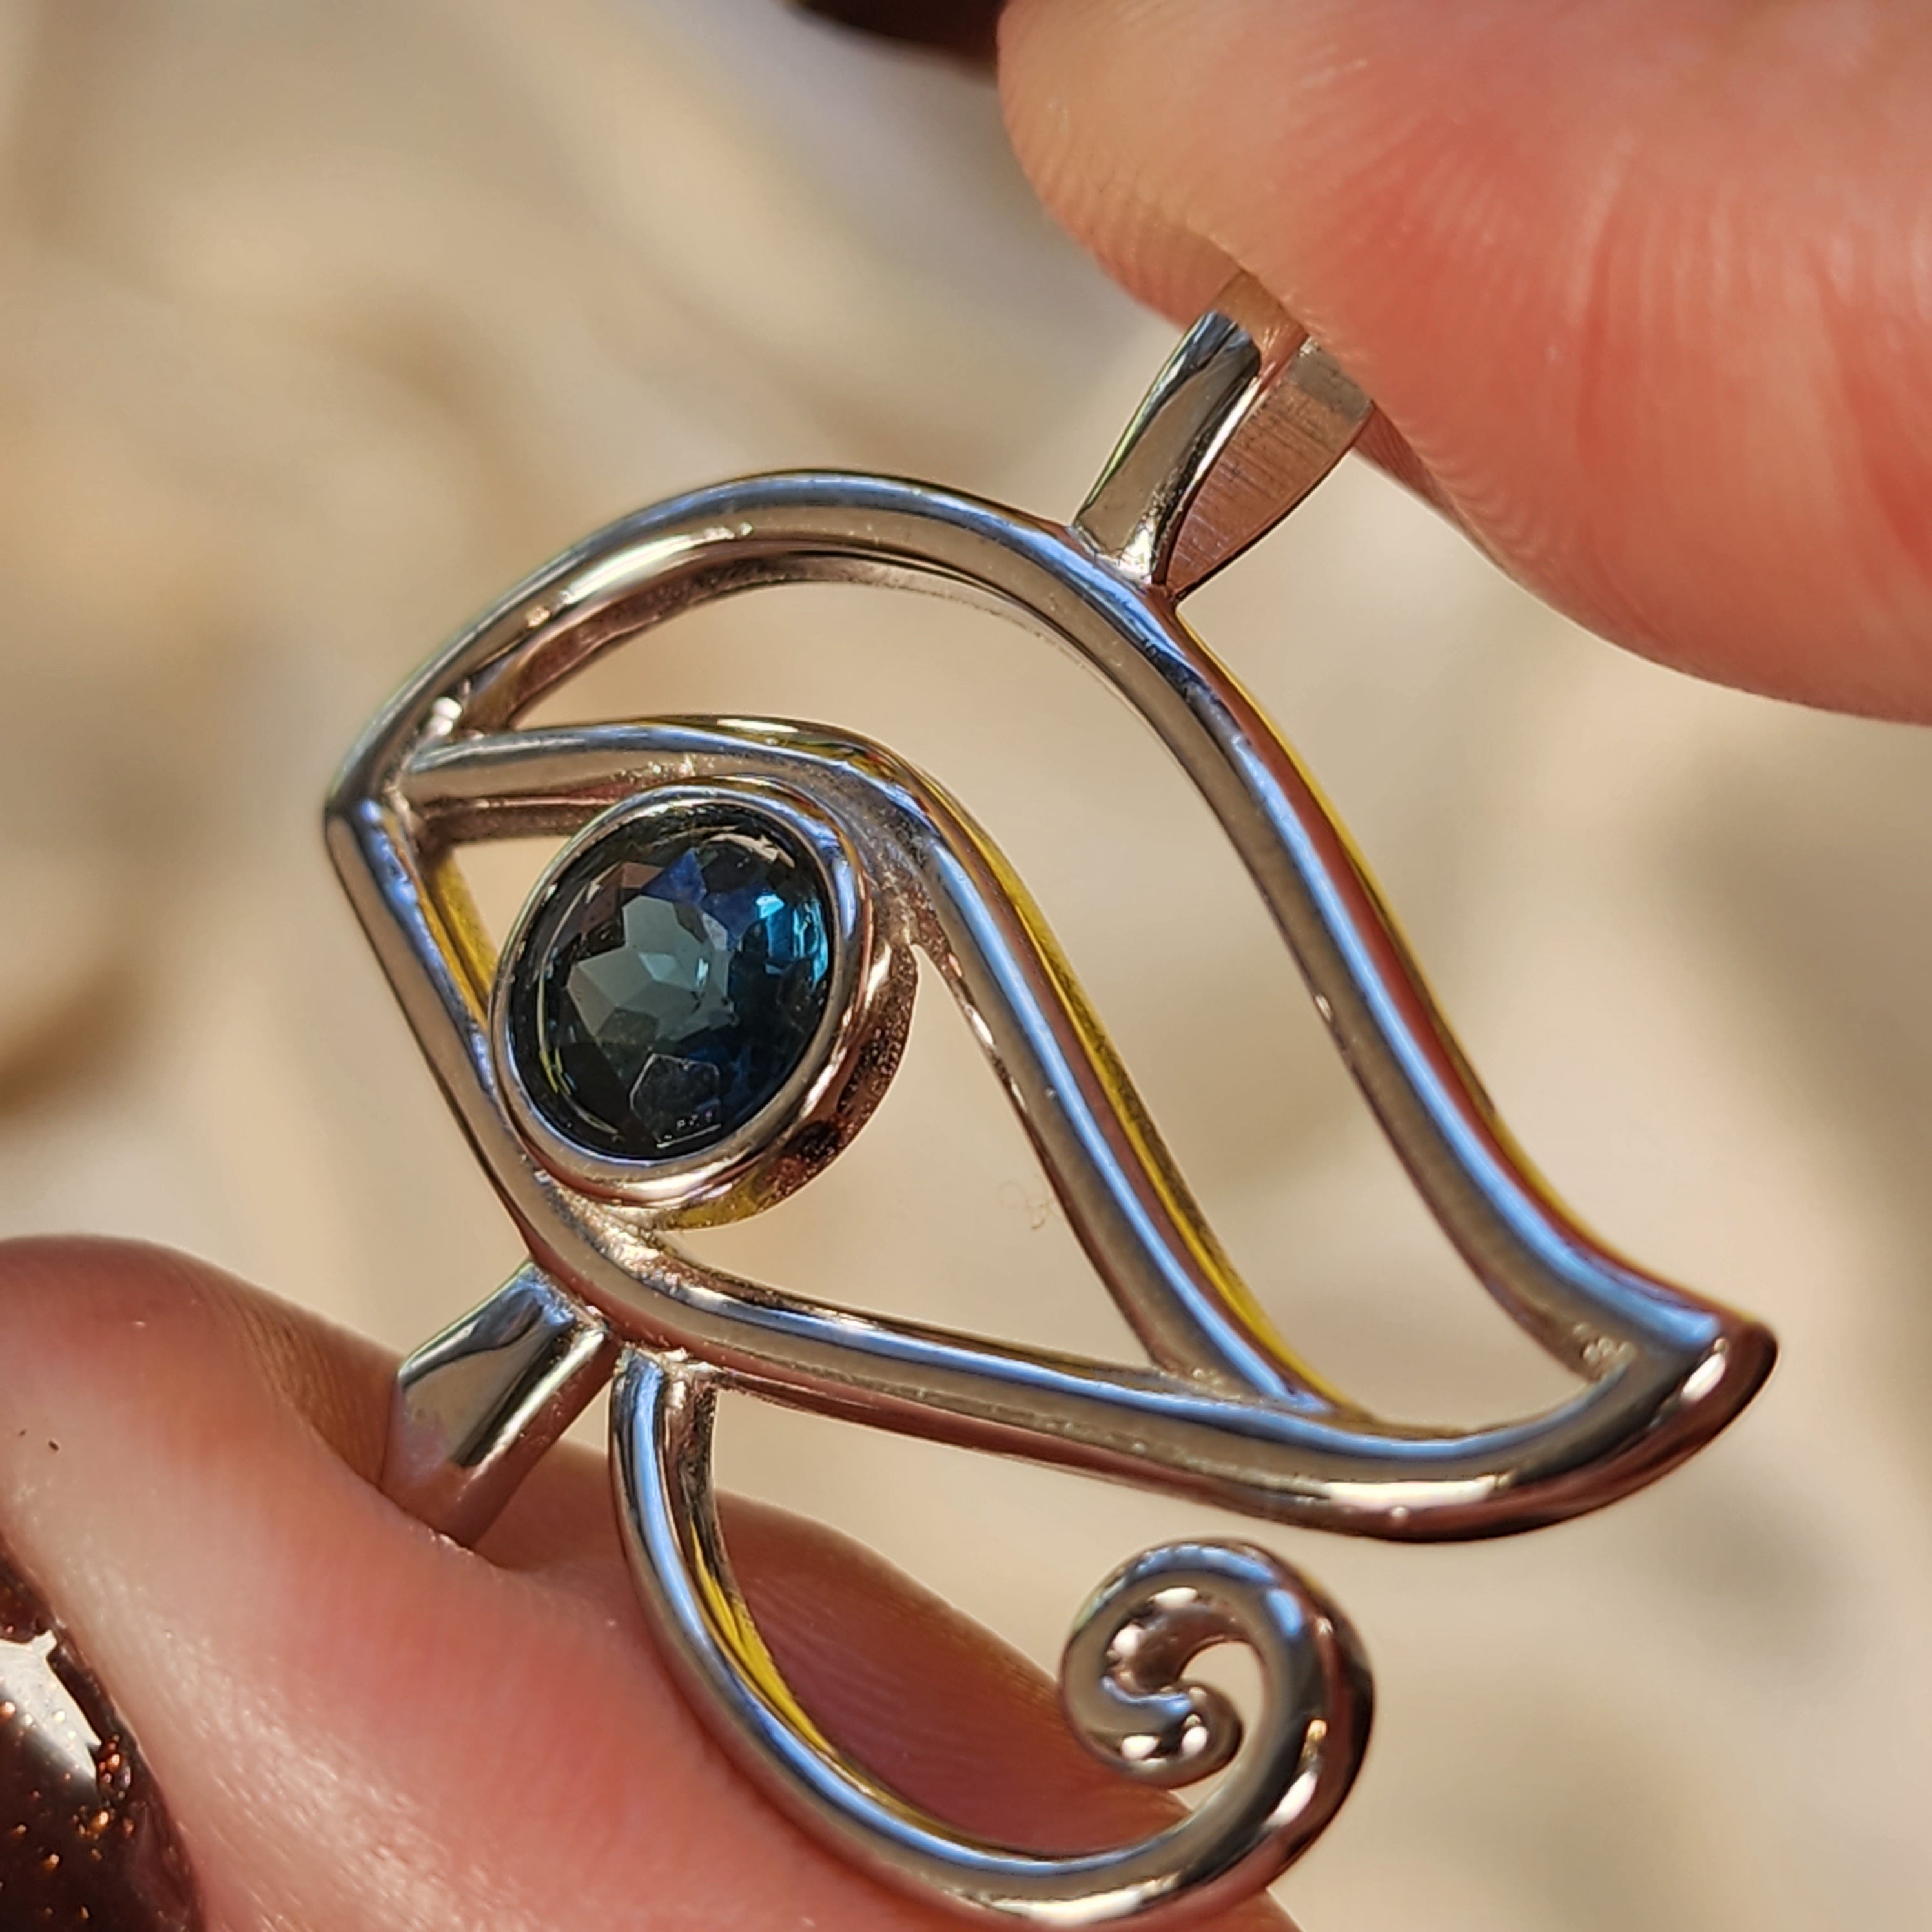 London Blue Topaz Eye of Horus Amulet Pendant .925 Silver for Esoteric Wisdom, Communication with Spirit Guides and Peace